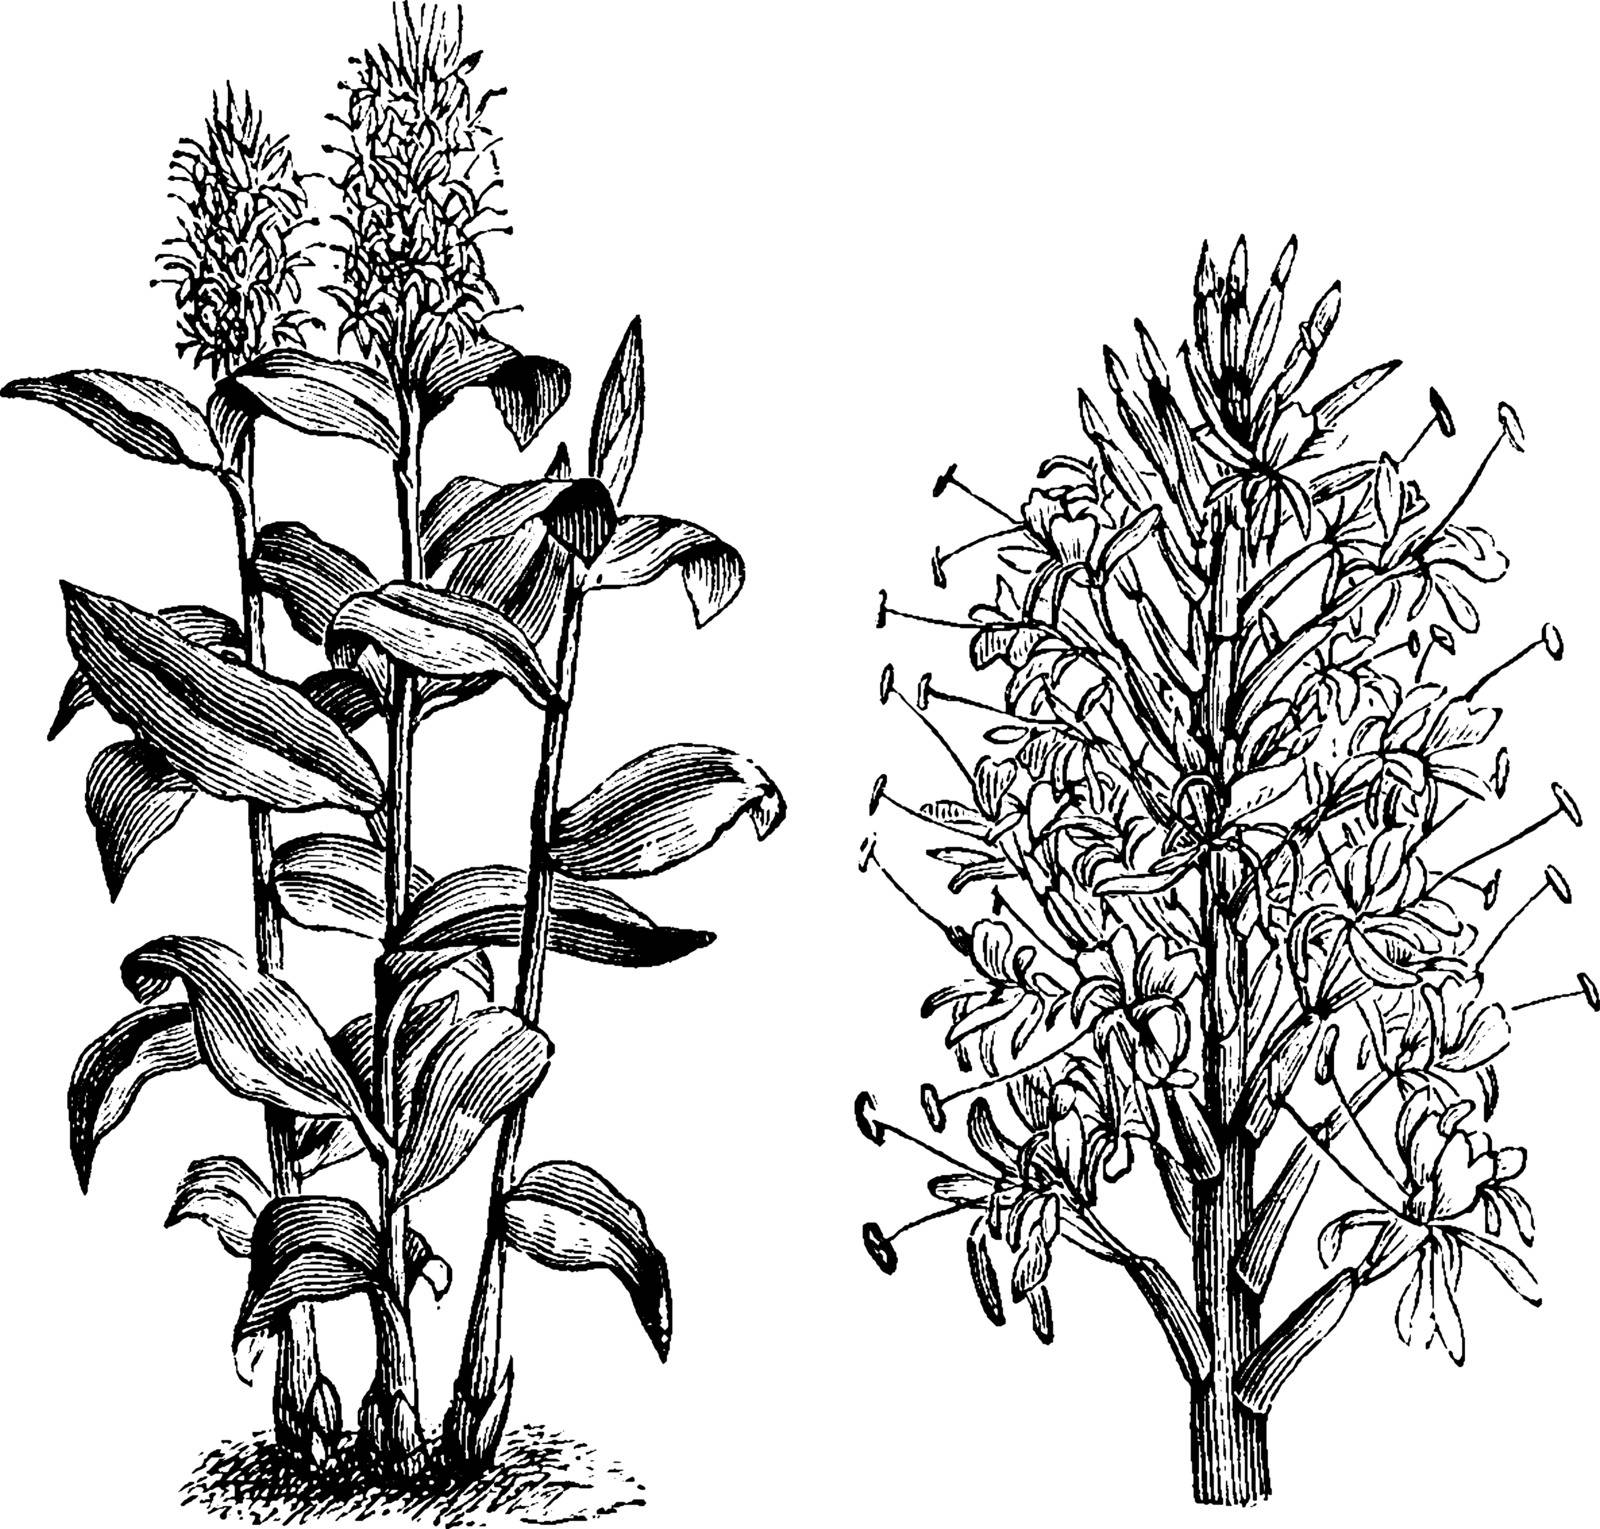 Hedychium gardnerianum is a plant native to the Himalayas in India, Nepal, and Bhutan. It grows to 8 ft. tall with long, bright green leaves clasping the tall stems. The leaves are planted in two rows, vintage line drawing or engraving illustration.